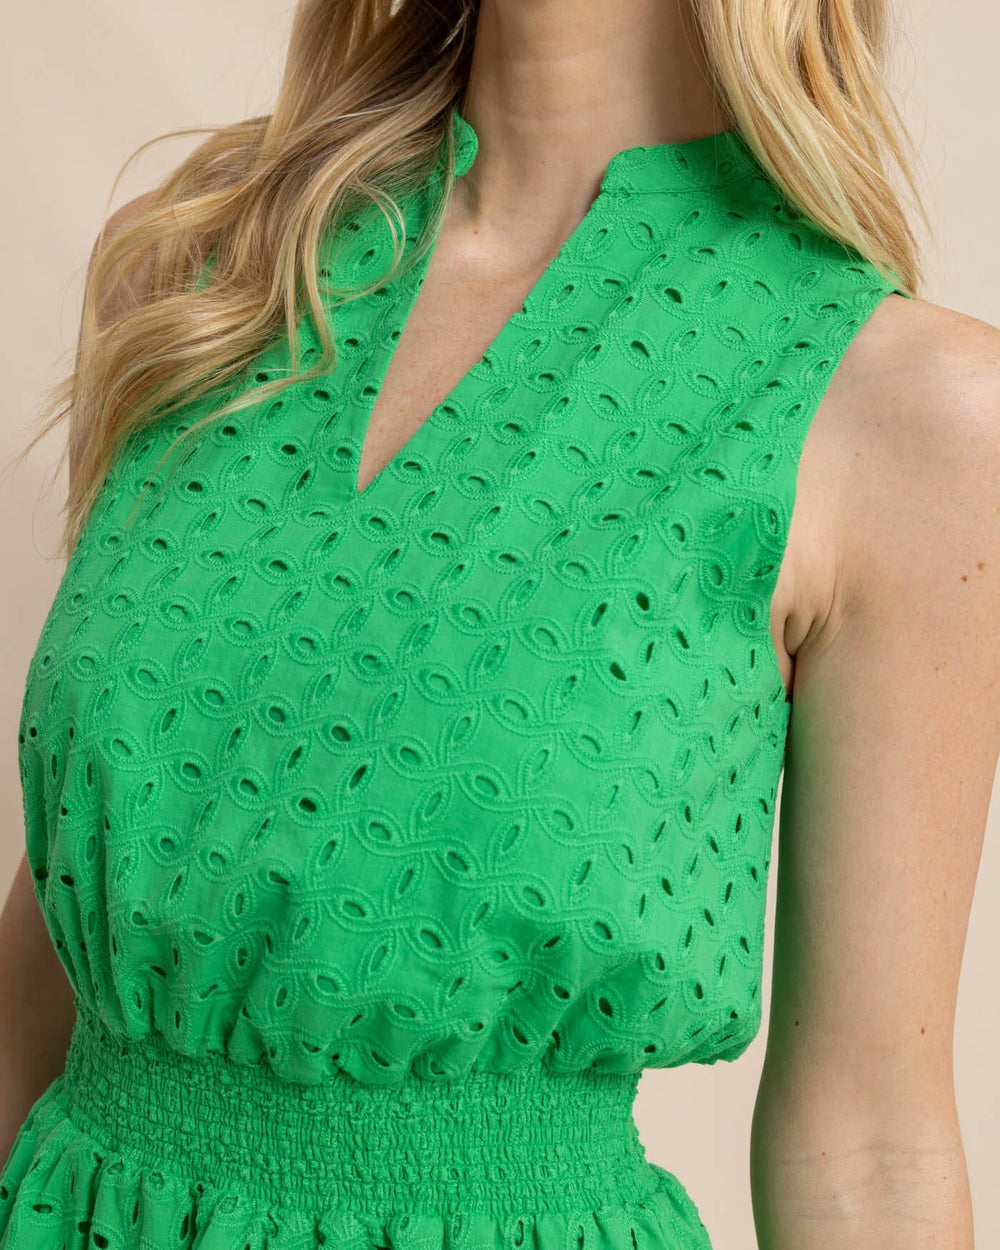 The detail view of the Southern Tide Londyn Eyelet Dress by Southern Tide - Lawn Green